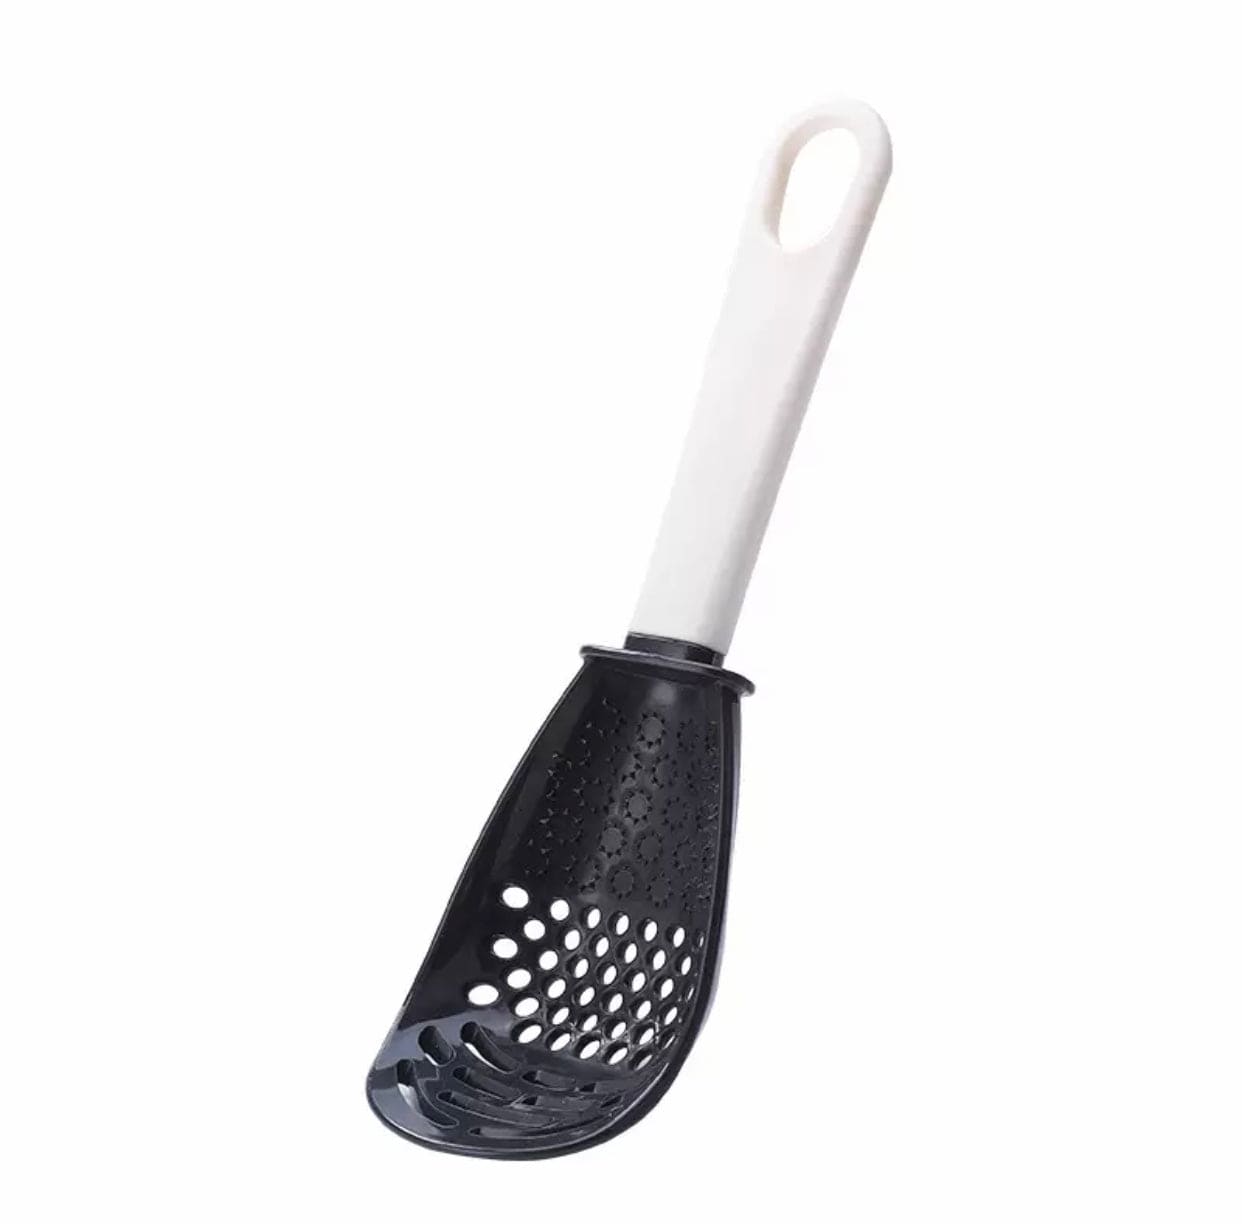 Silicone Garlic Crusher Draining Spoon, Silicone Skimmer Slotted Spoon, Colander Spoon, New silicone frying spatula, Multi-Purpose Grinding Mashed Colander Spoon